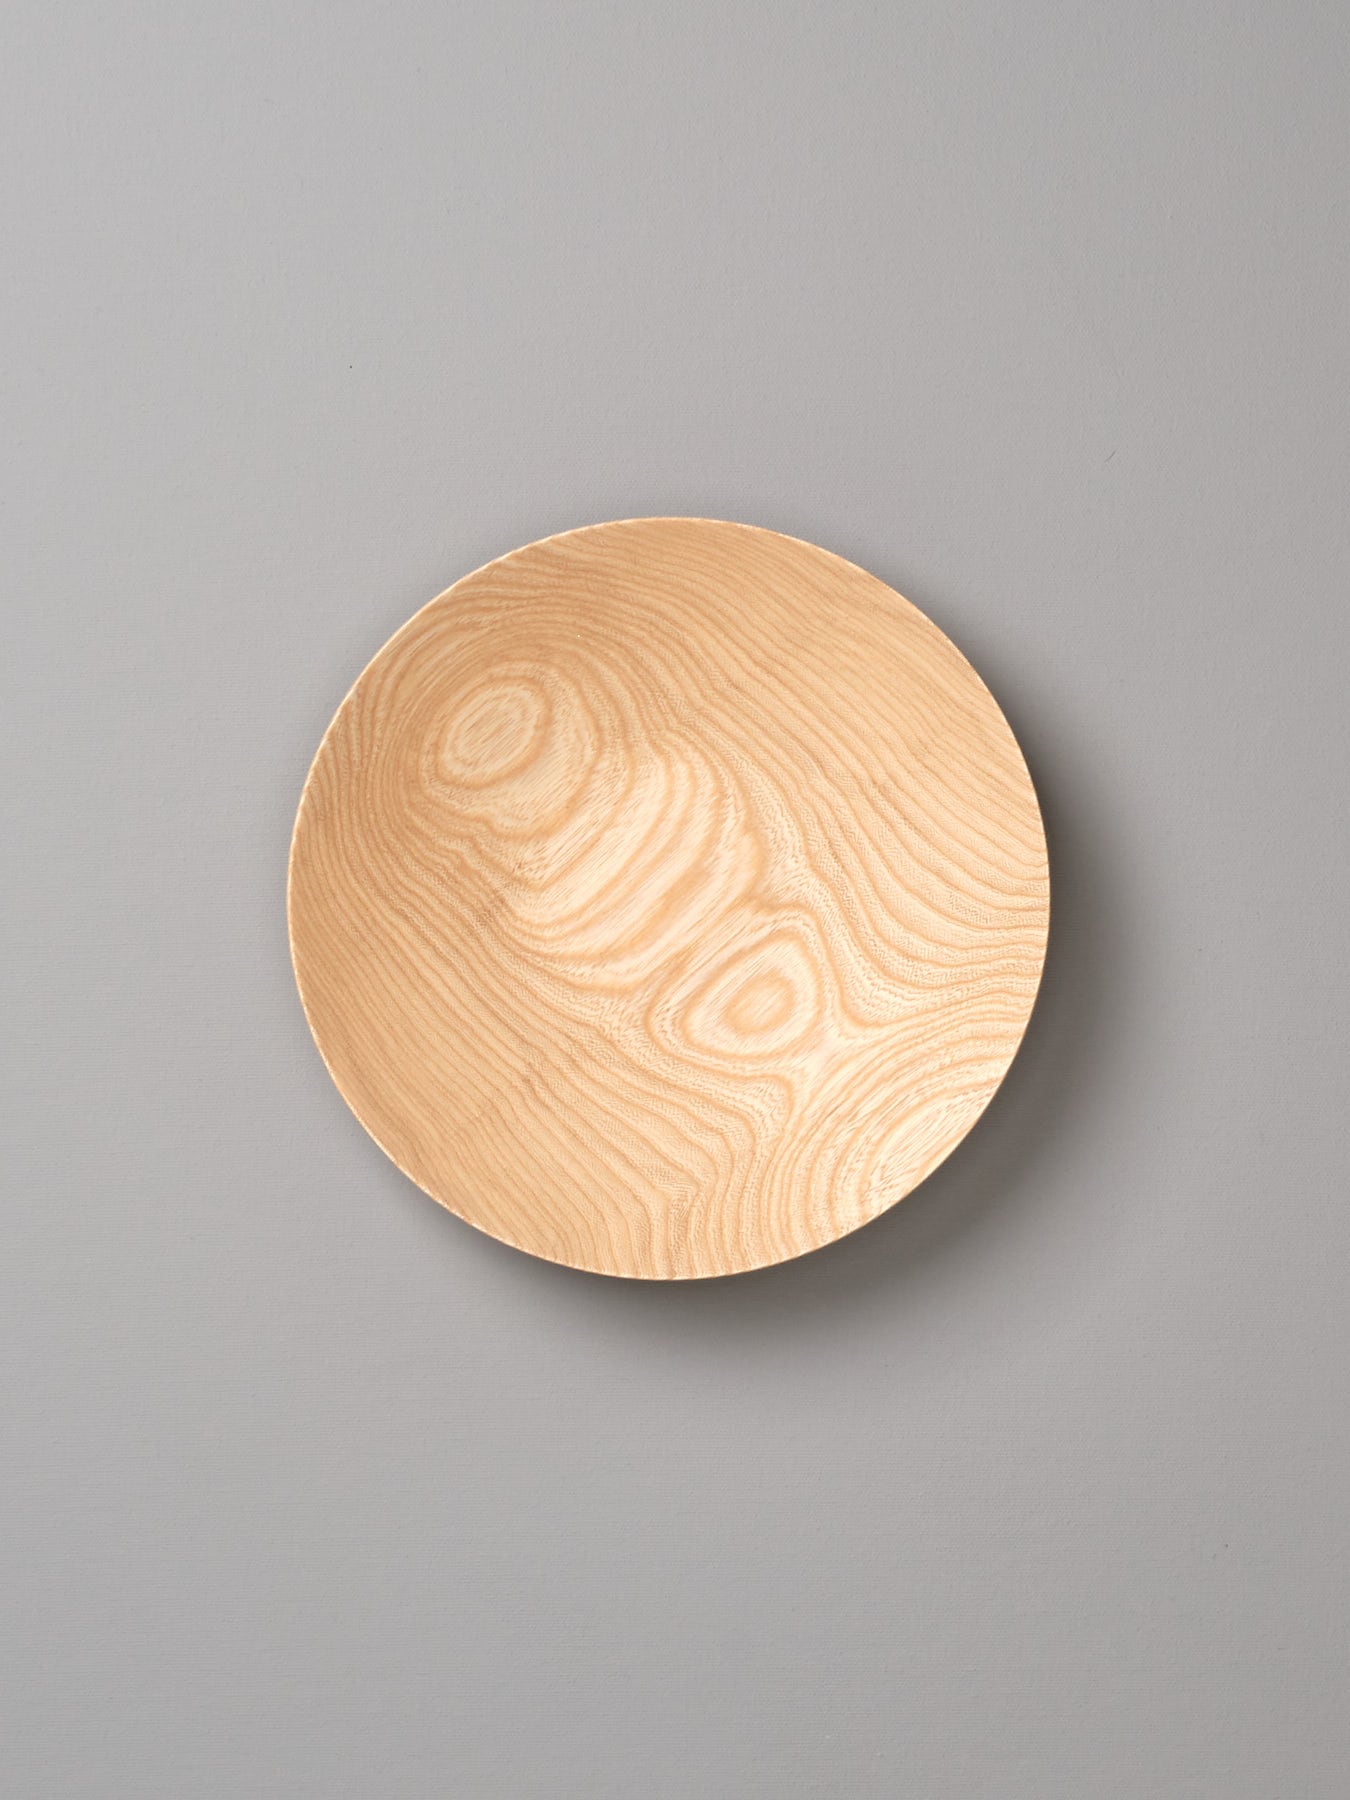 A round Kihachi wooden plate on a gray background.